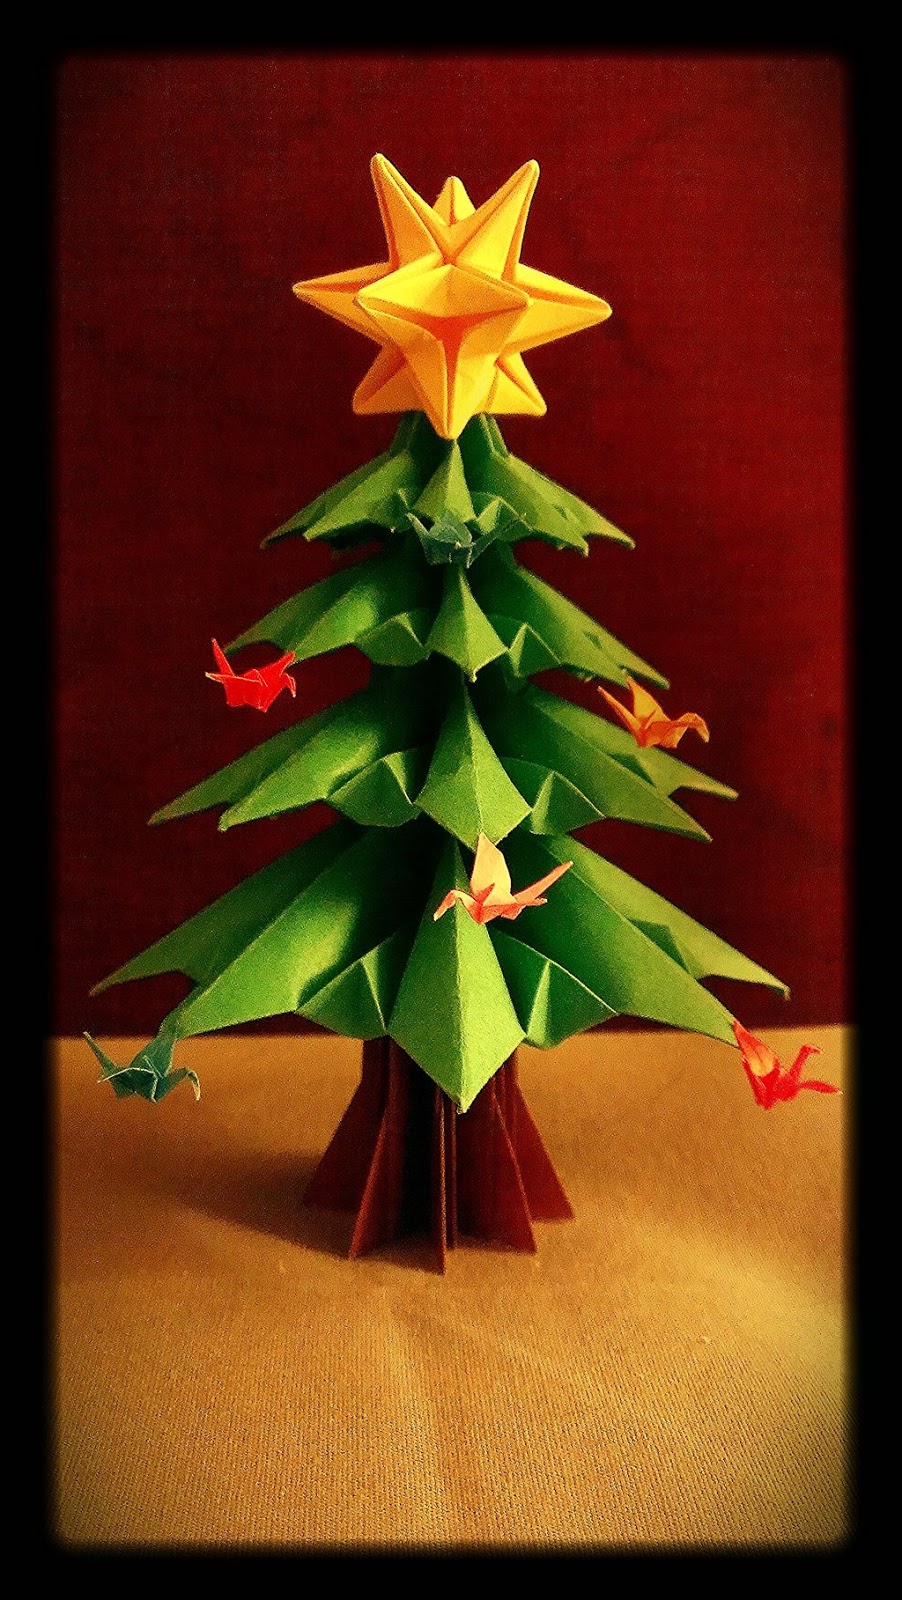 Top 5 Designs of 3D Origami Tree Paper Origami Guide